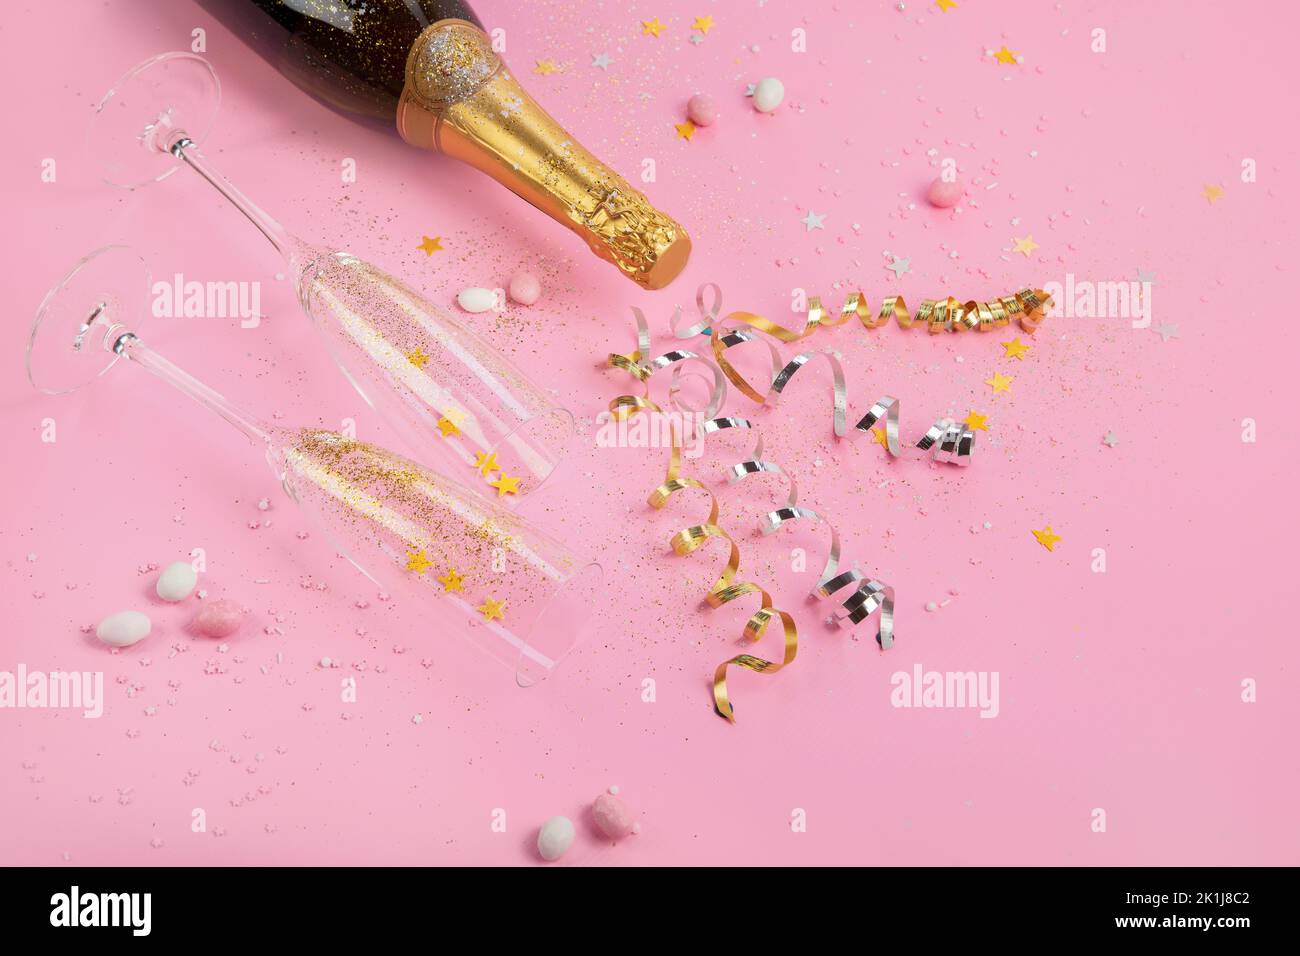 Champagne bottle with confetti on pink background. Holiday decoration and party streamers on gold festive. Creative concept. Stock Photo